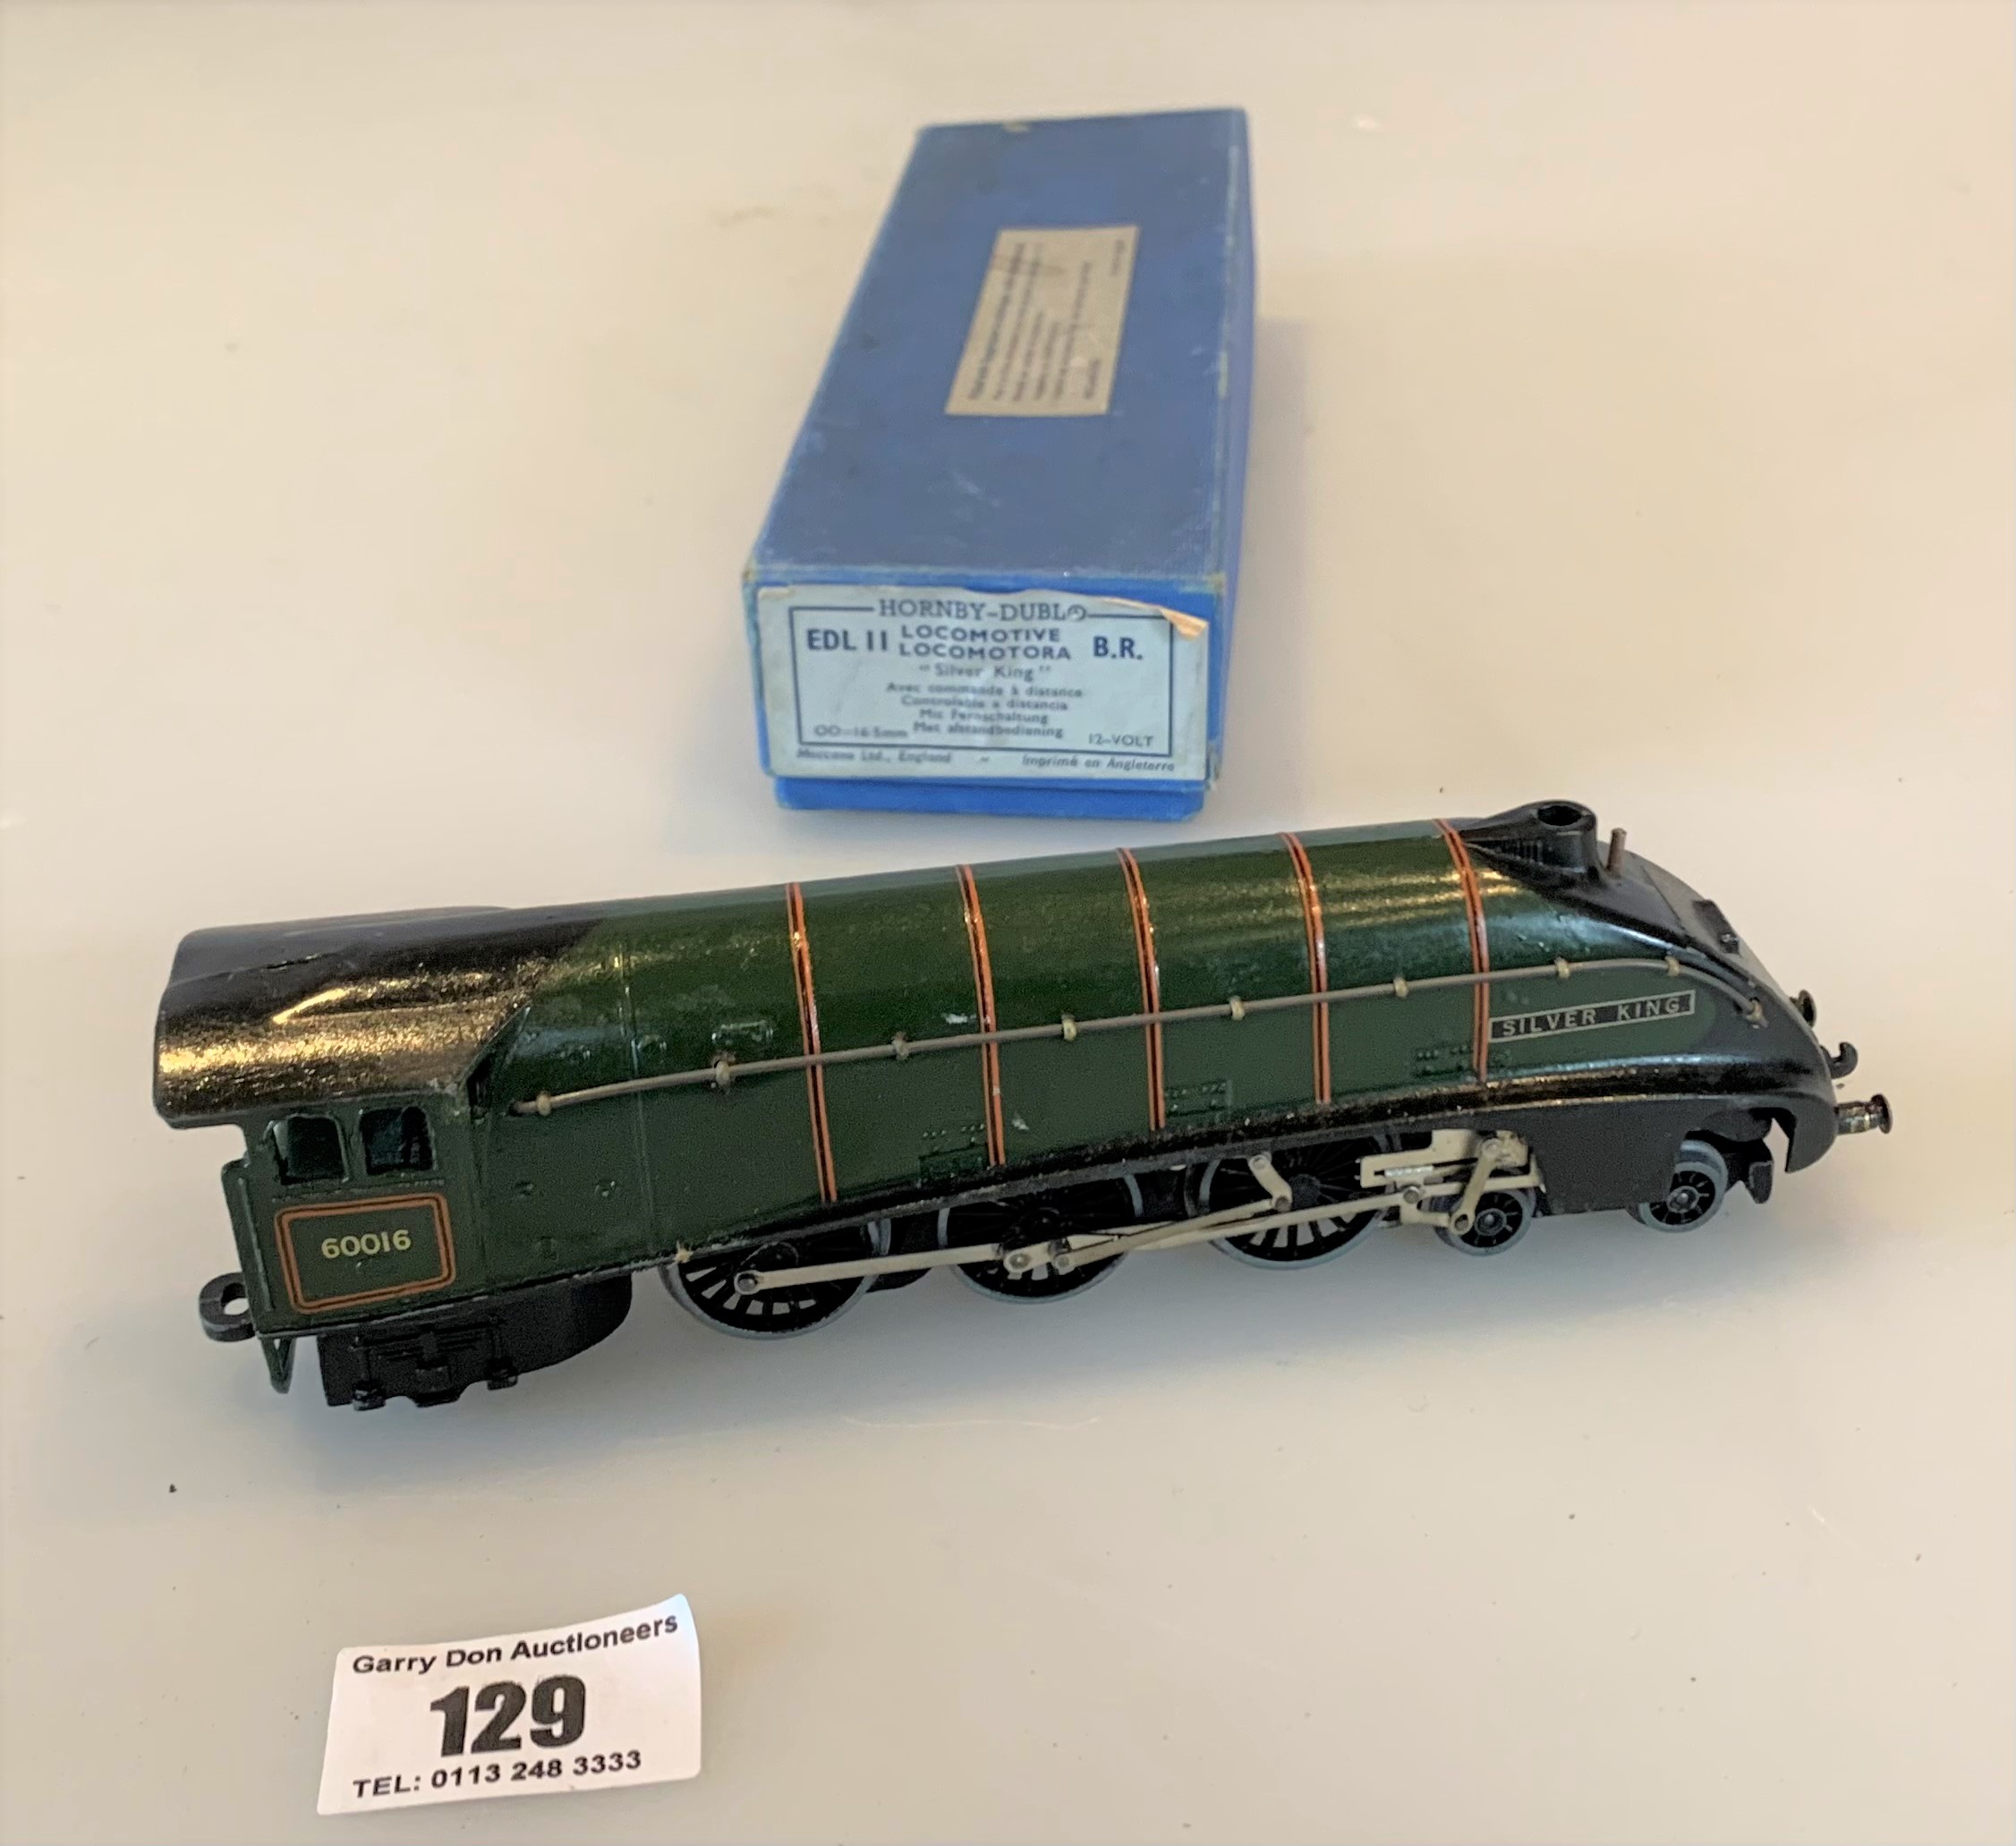 Hornby Dublo Electric Train set with EDL11 locomotive BR ‘Silver King’, track, power control and - Image 12 of 13